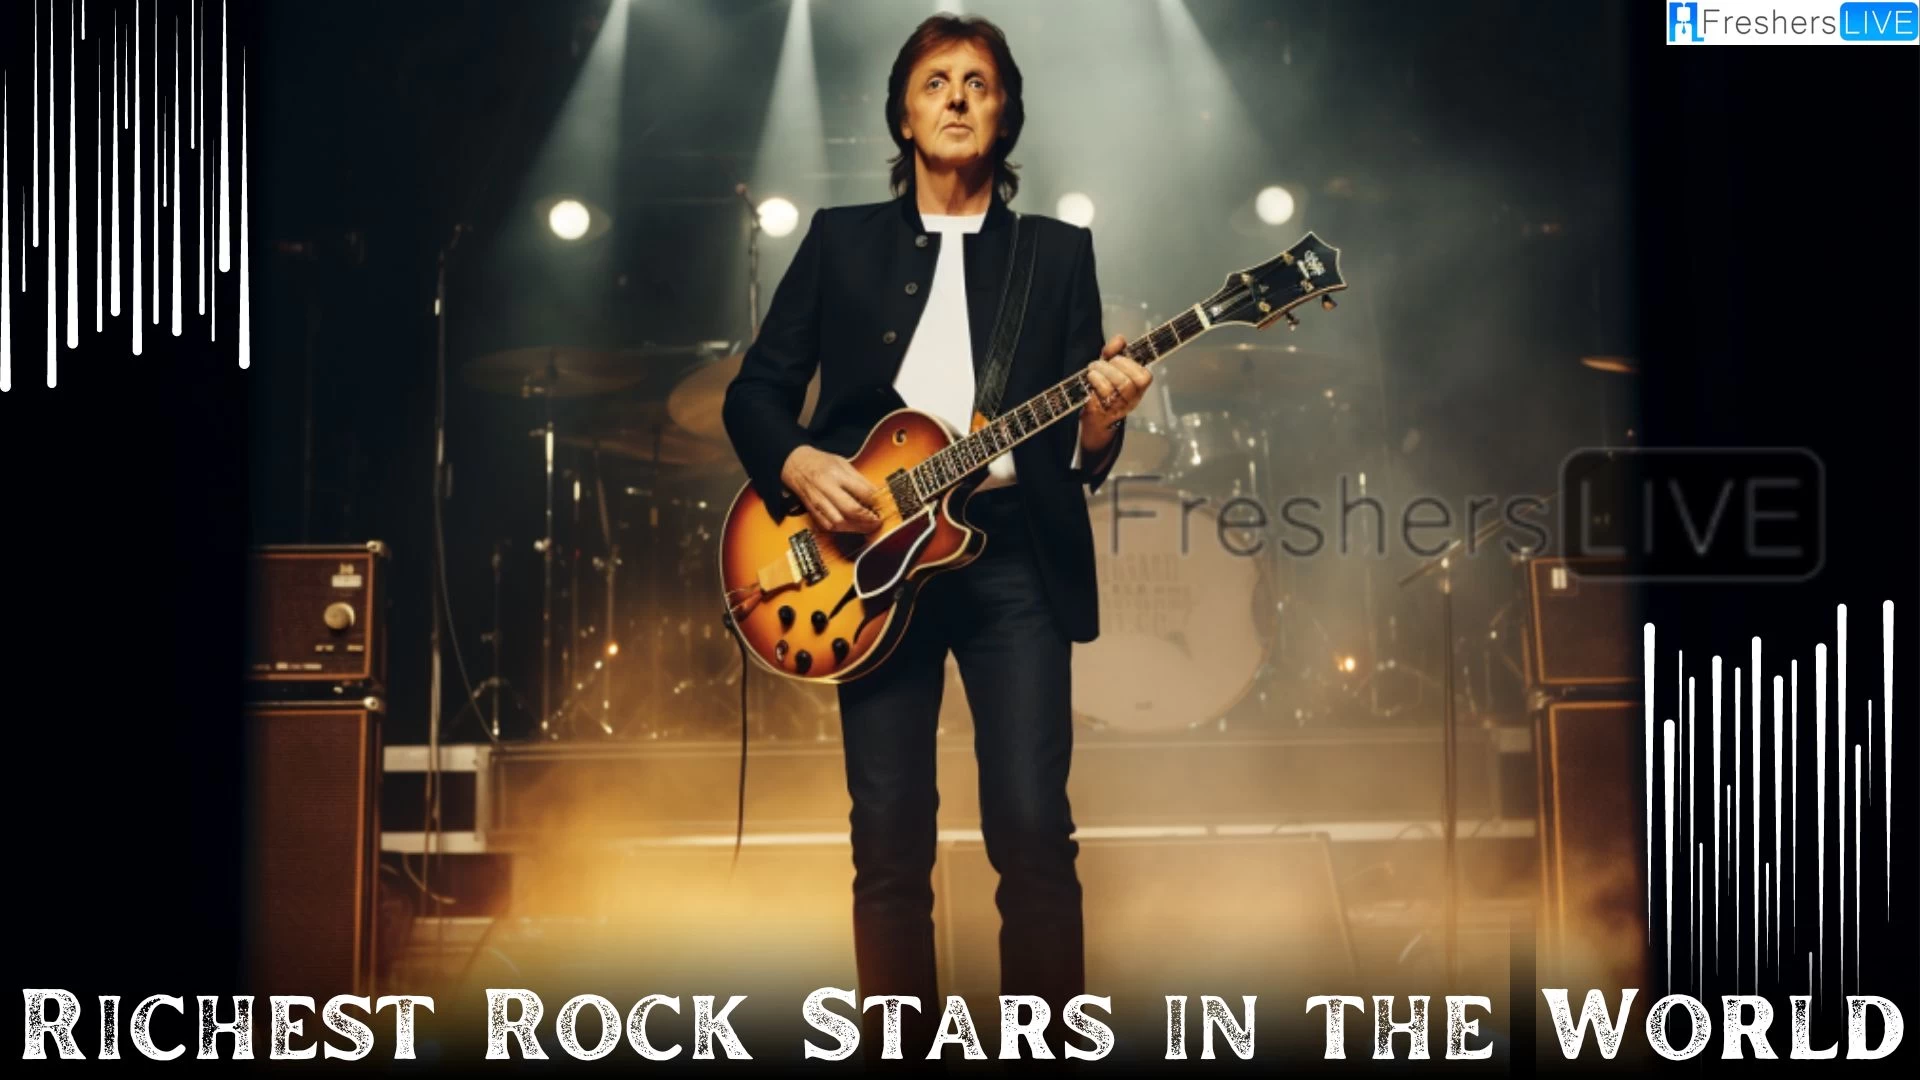 Richest Rock Stars in the World - Top 10 Listed